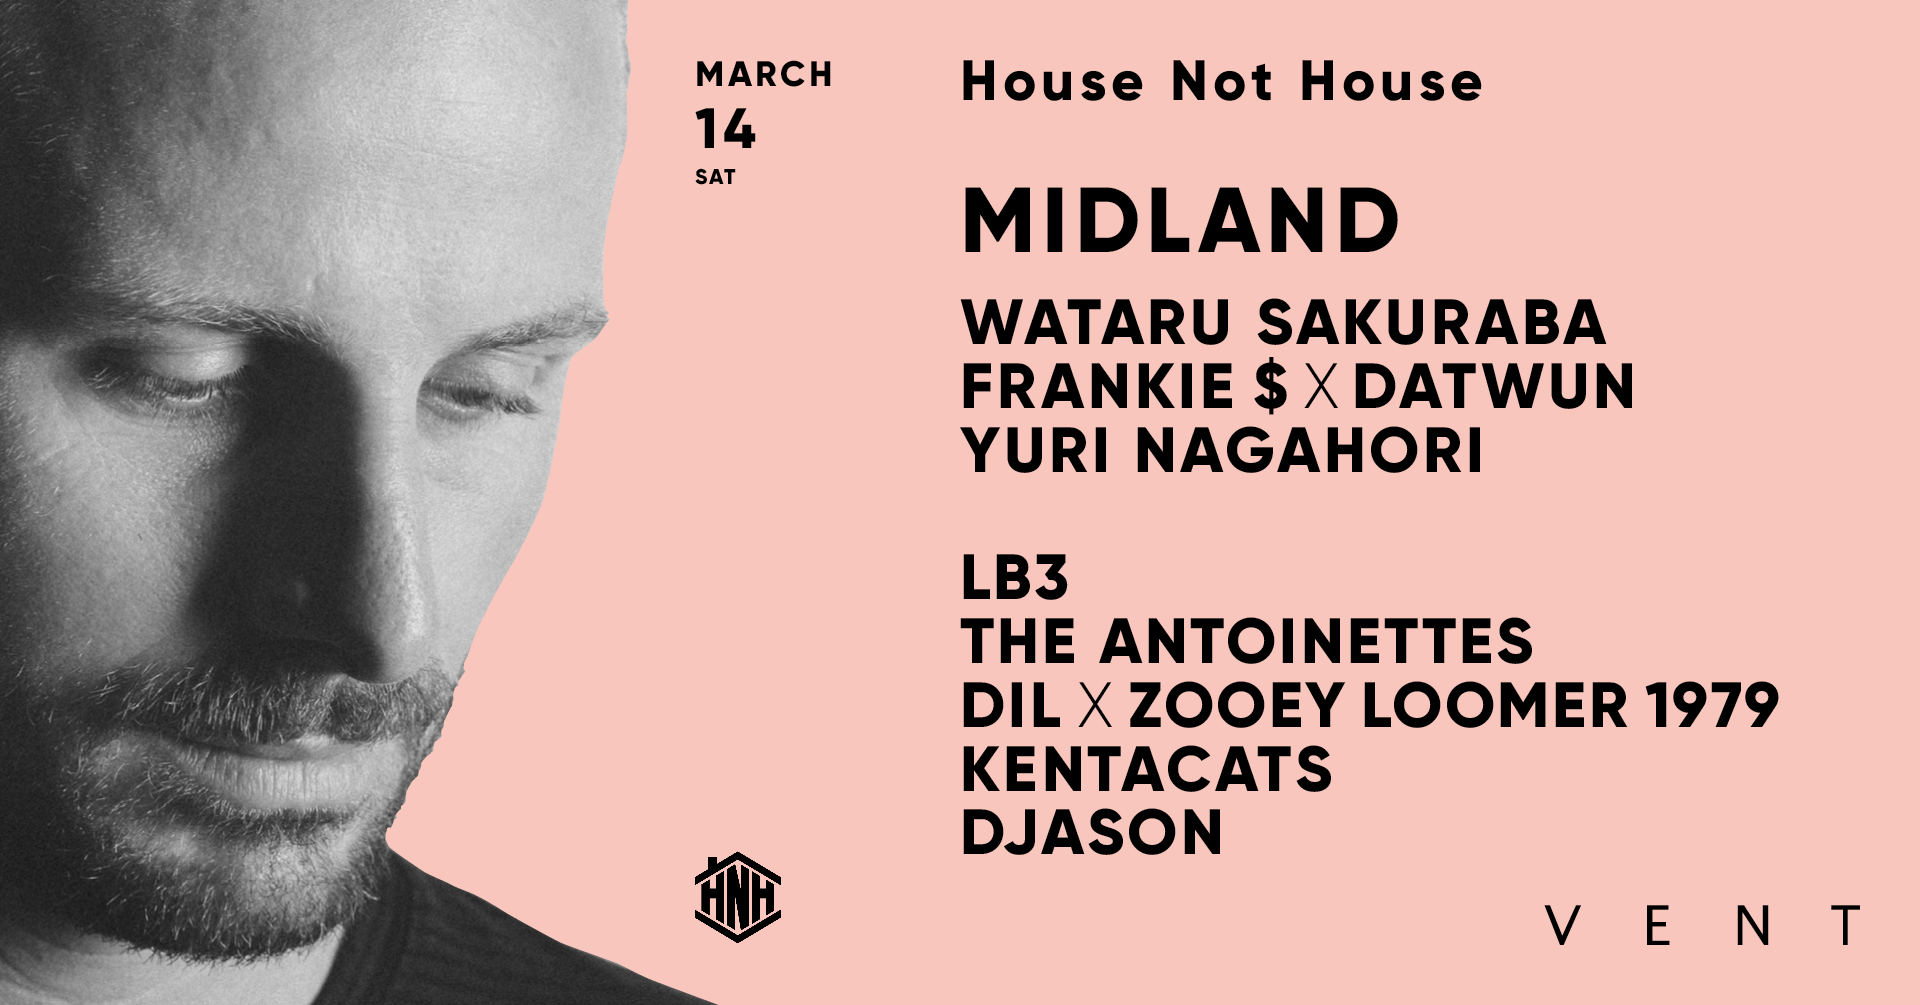 Midland at House Not House